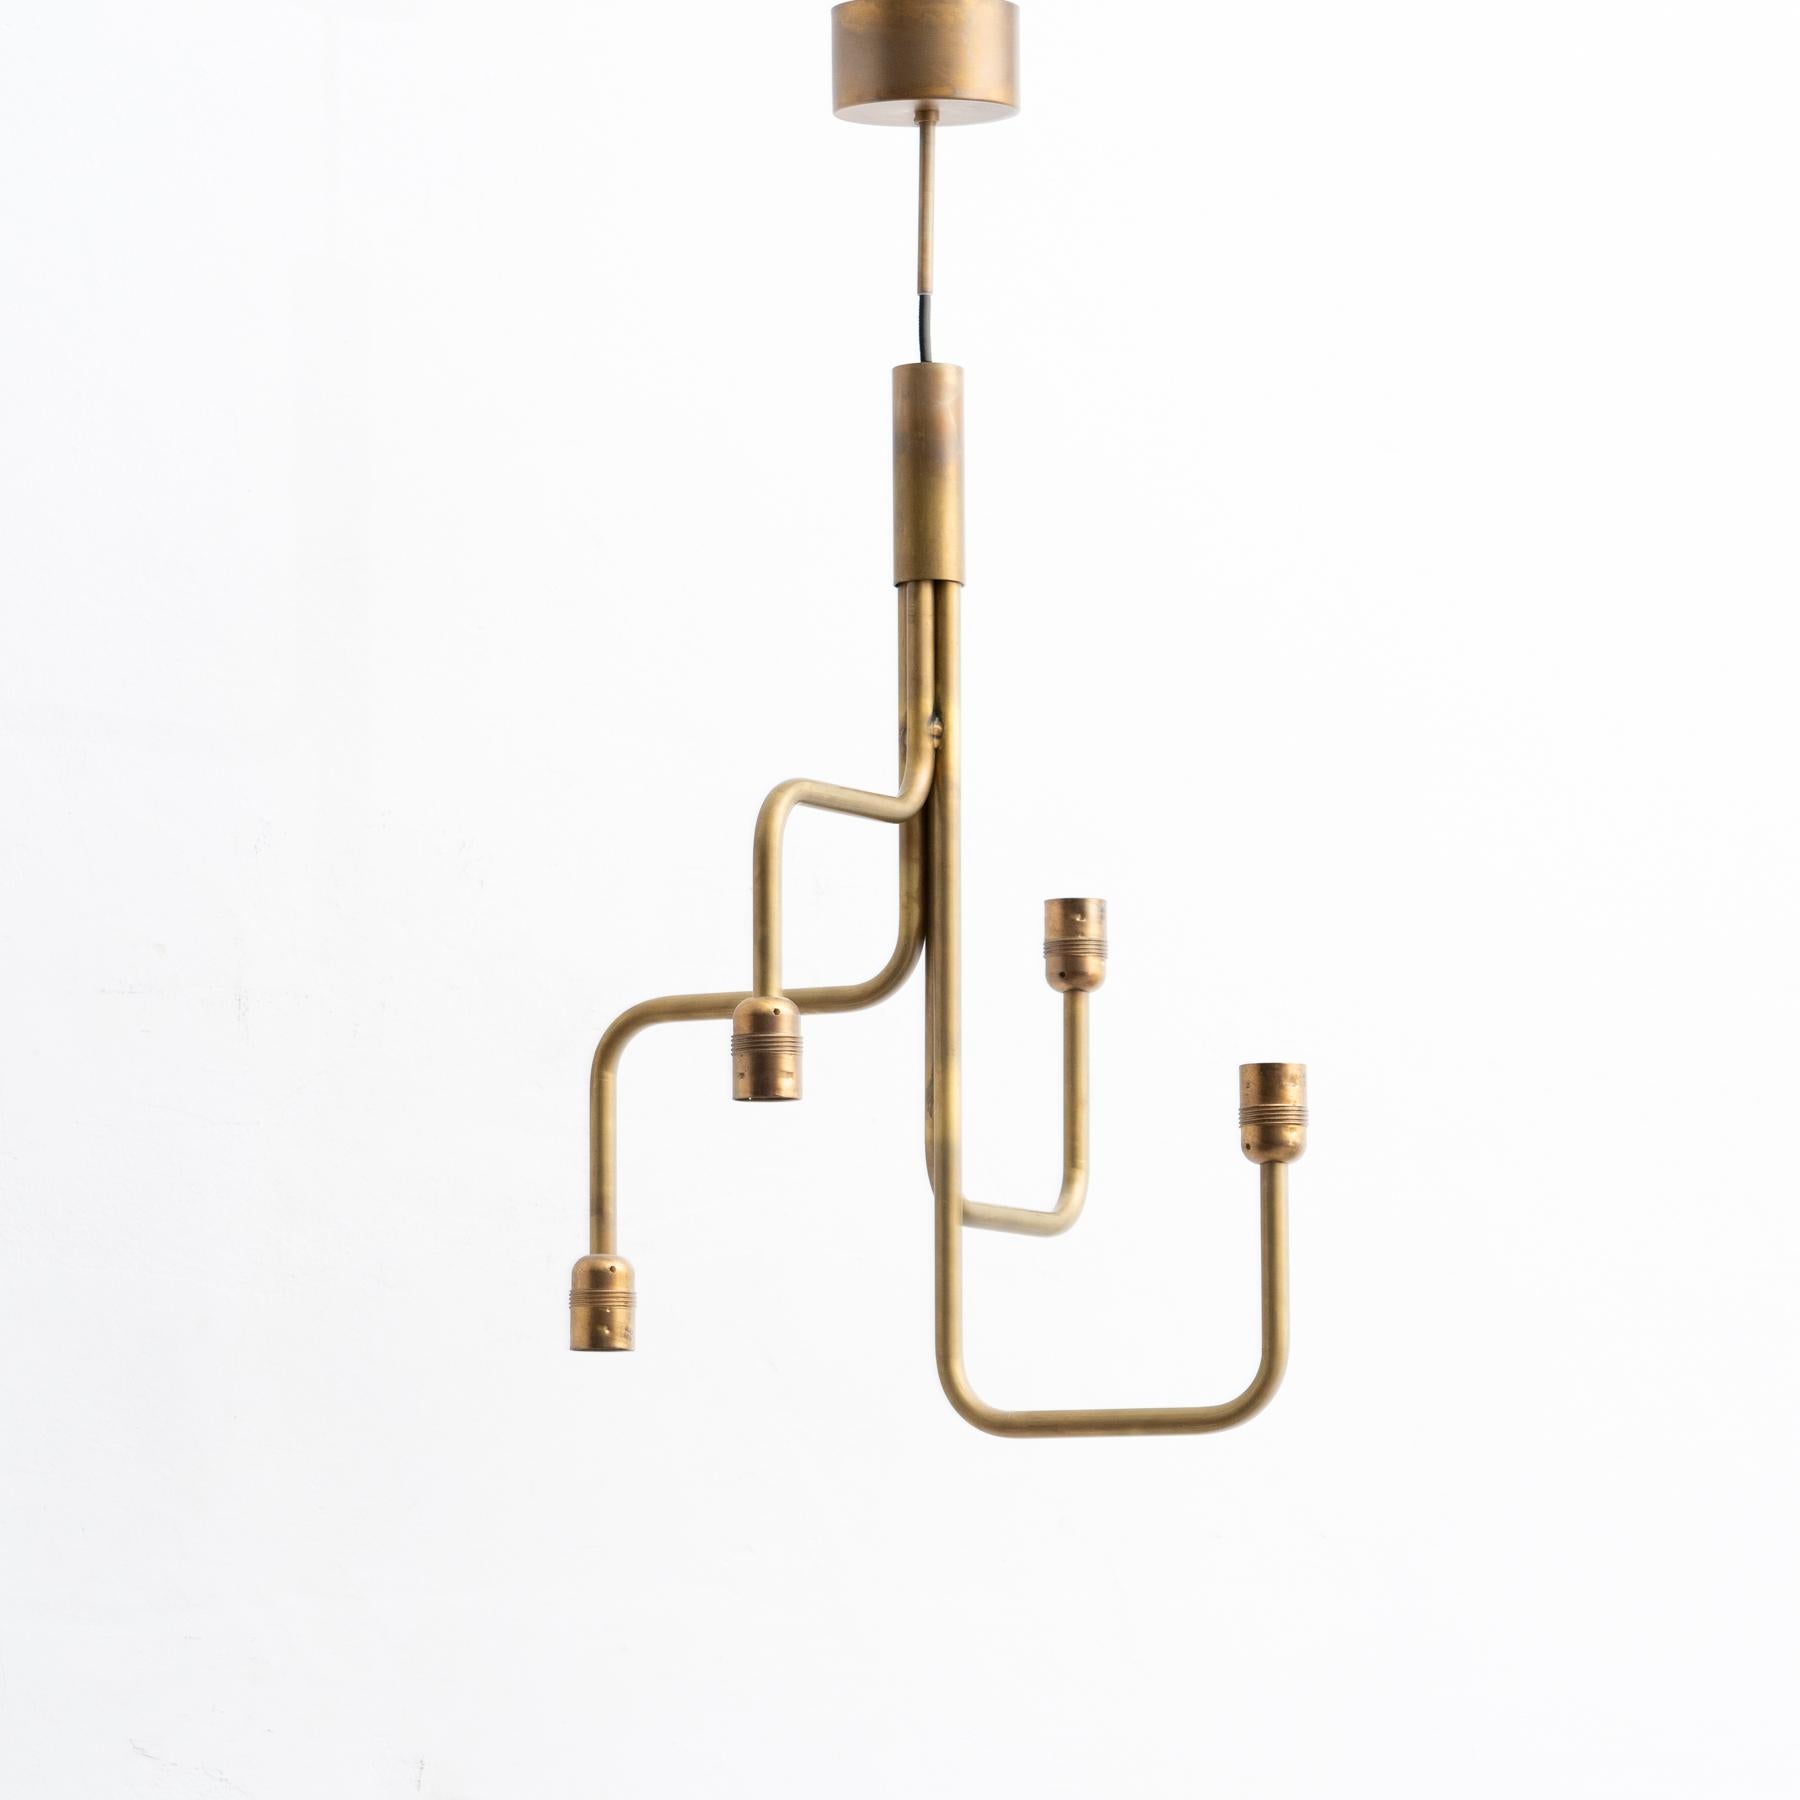 Ceiling lamp designed by Sabina Grubbeson manufactured by Konsthantverk Tyringe in Sweden.

Strapatz ceiling small
Measures: D 450 mm
H 600 mm, cord 3 m
Max 4 x 60 W E27
3414-6 raw brass
Bulbs not included.
The lamps are wiring with standard Europe